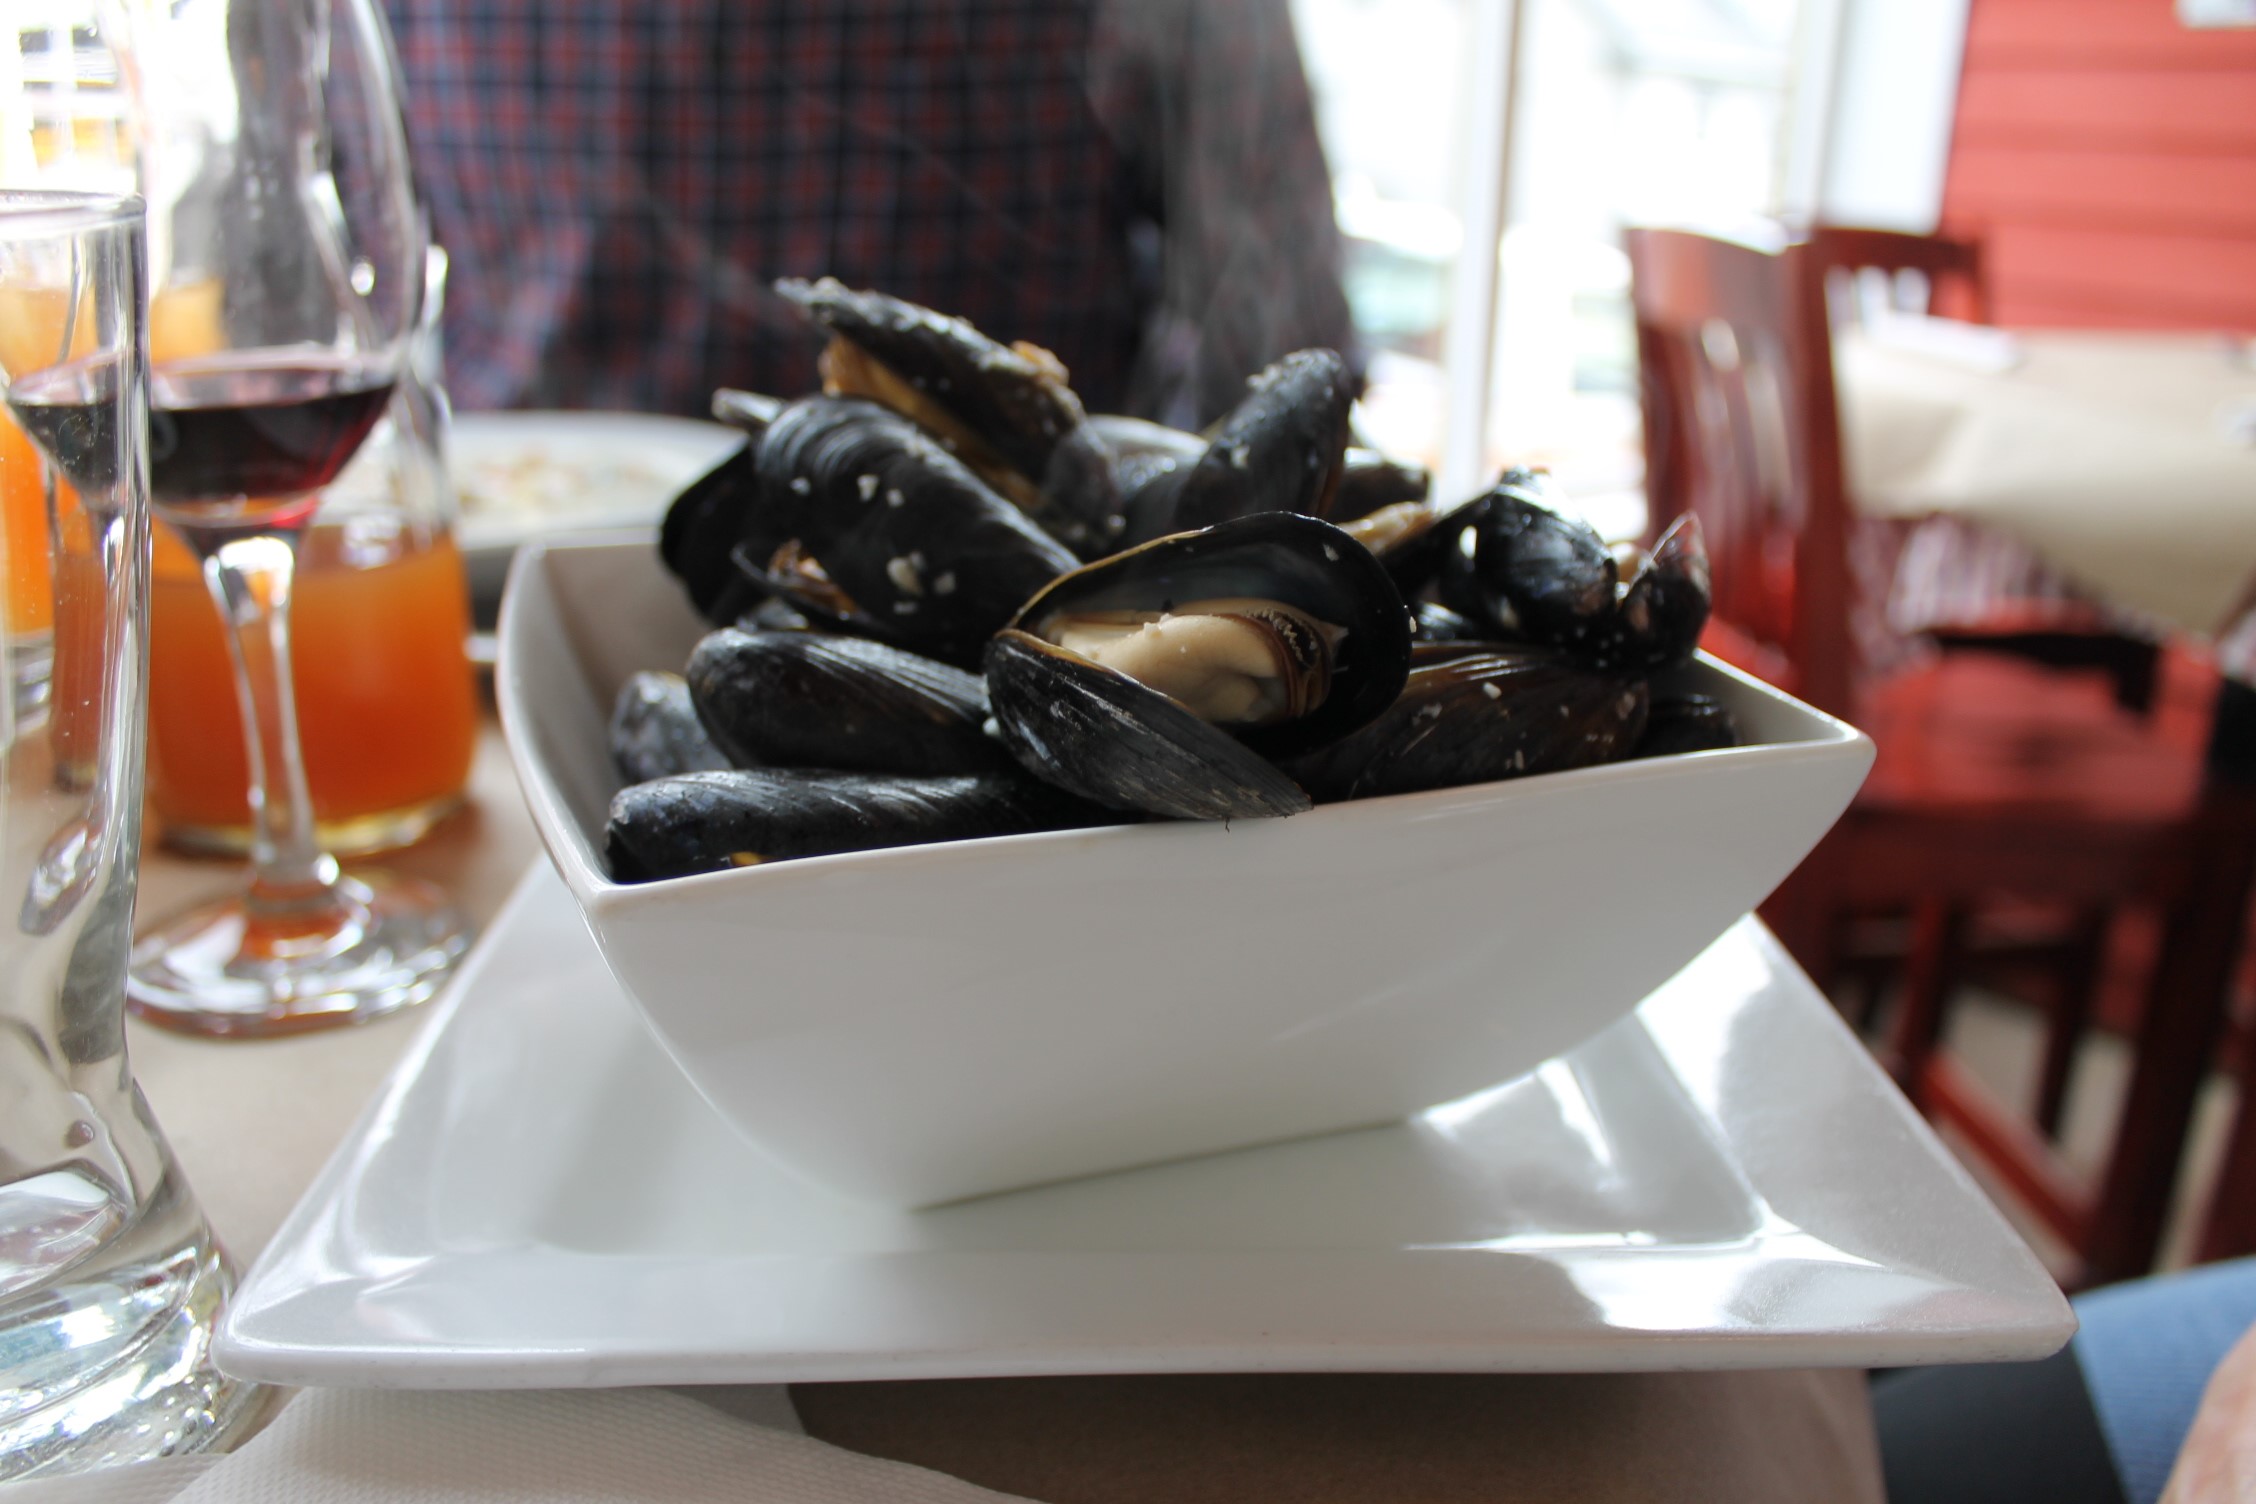 You should also try the mussels at Salt Shaker Deli in Lunenburg! 